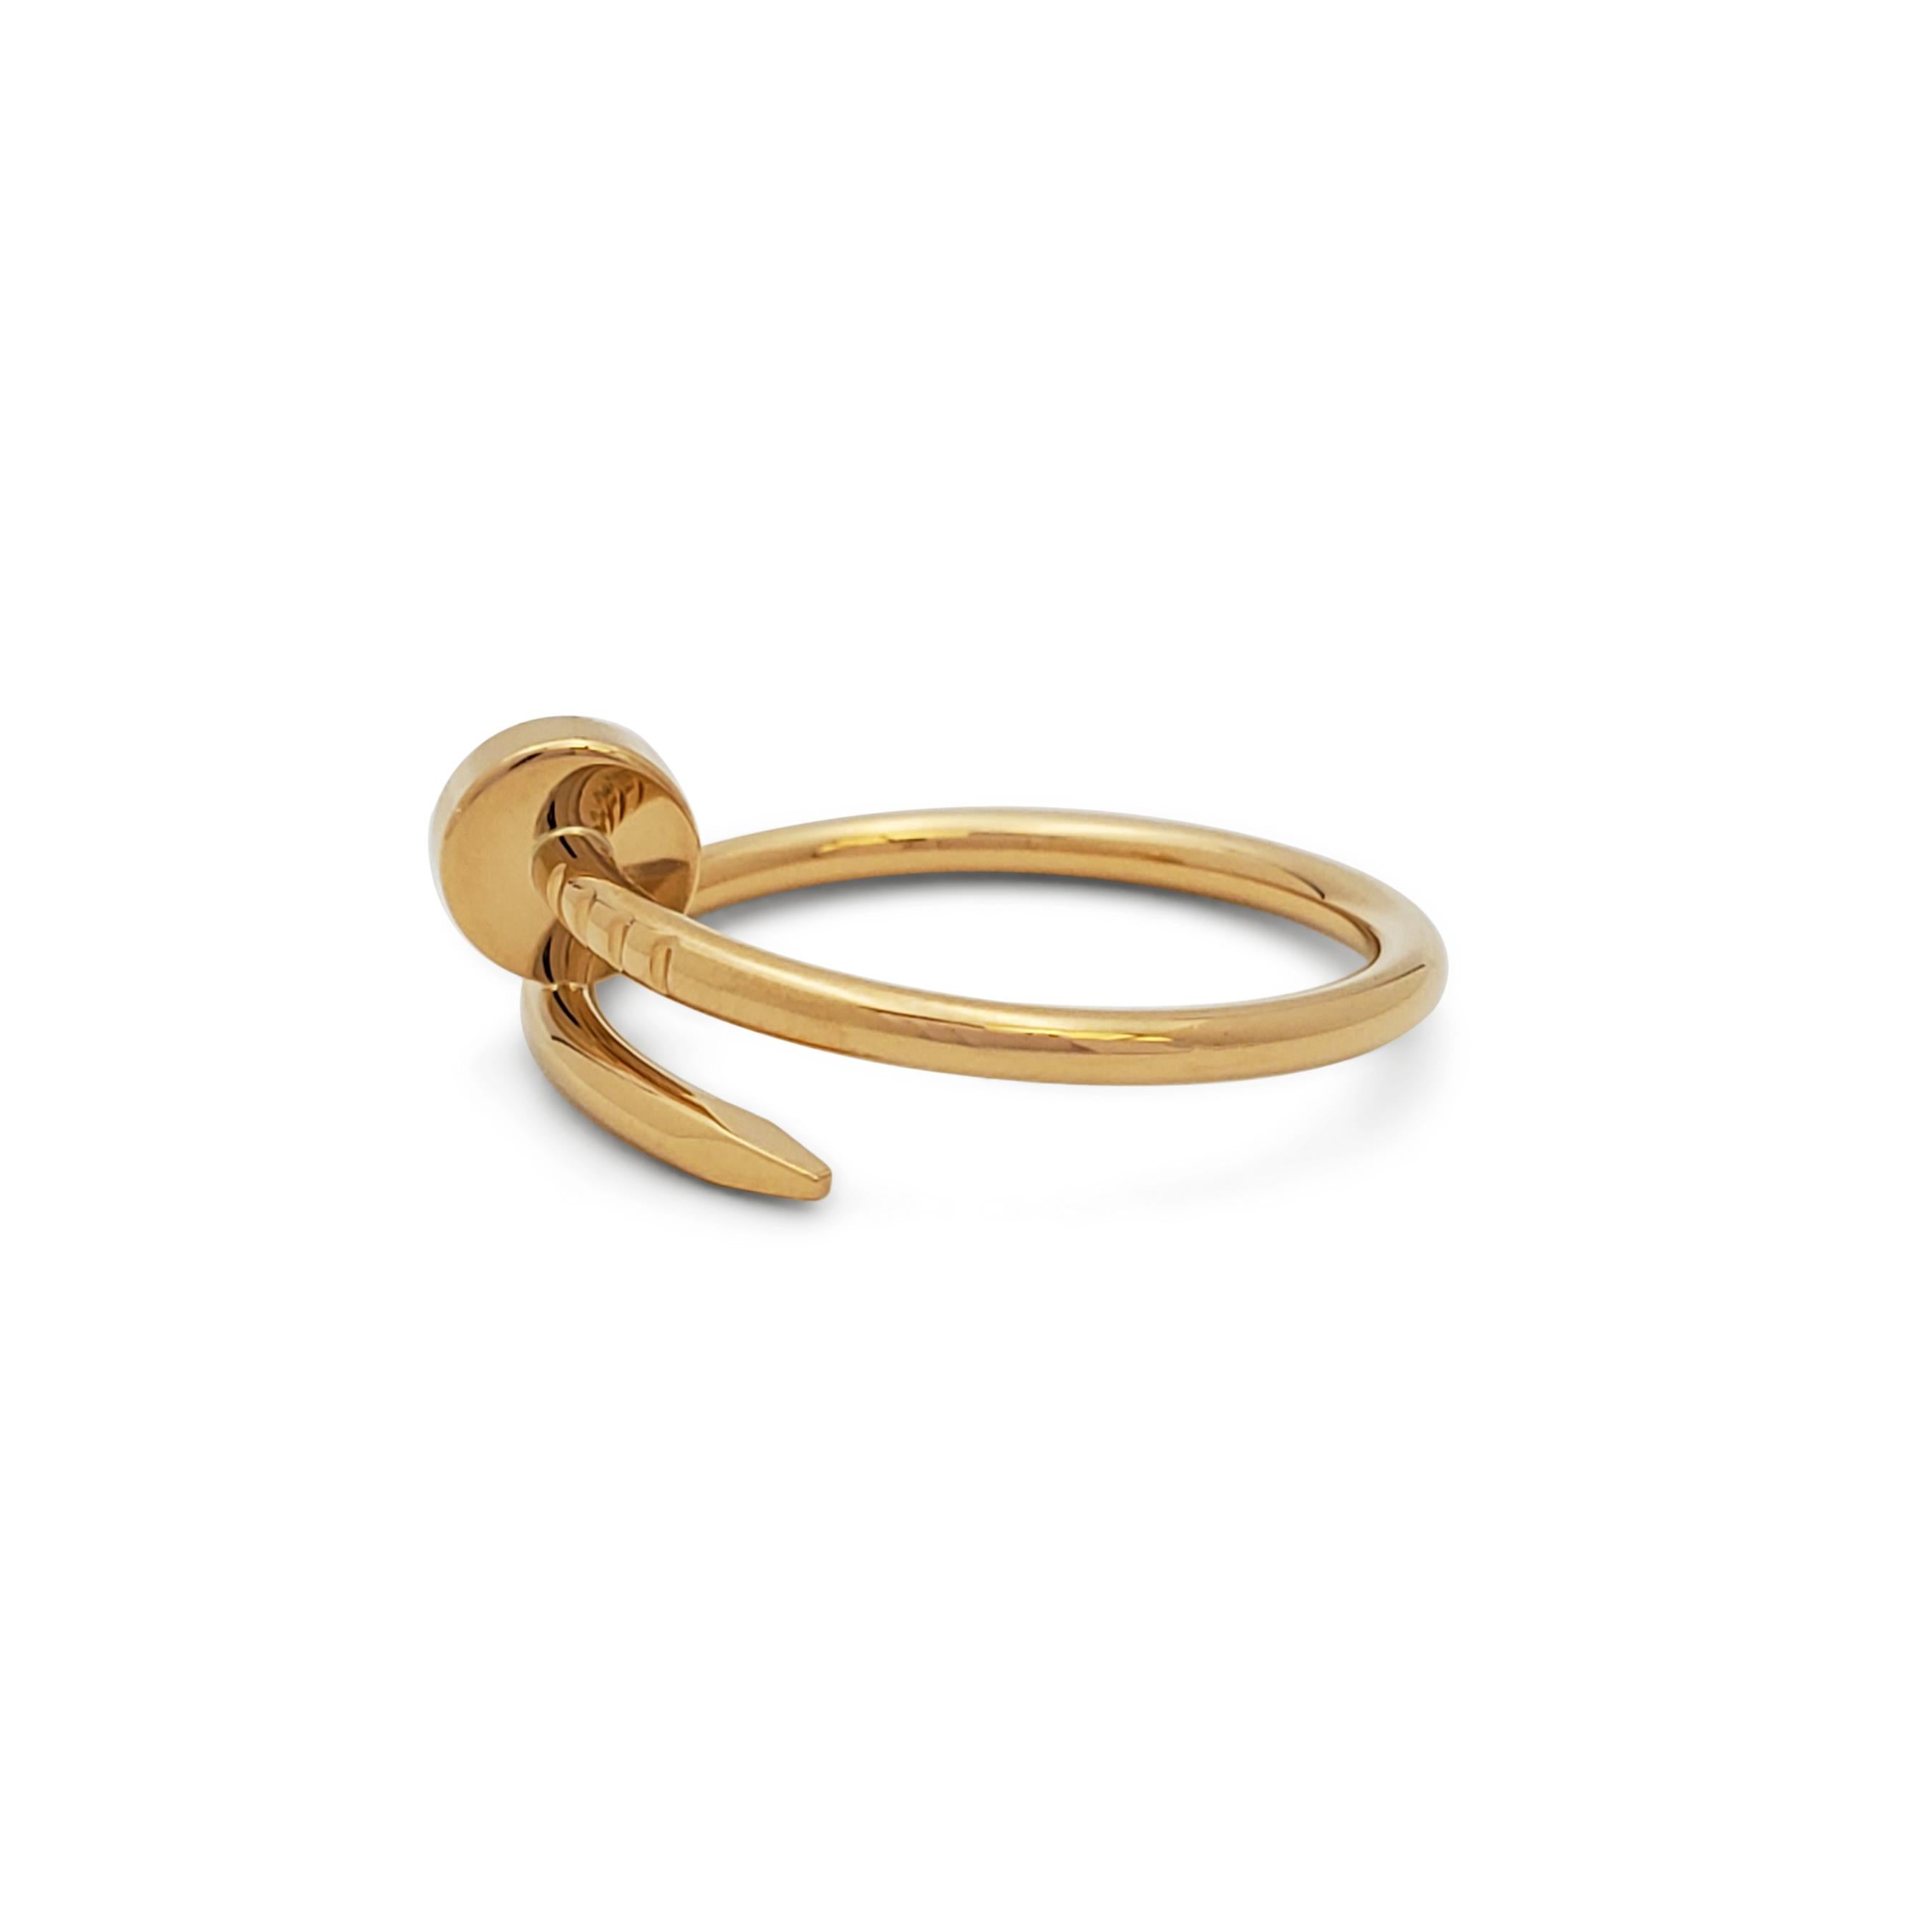 Designed as a 'just a nail', this authentic Cartier 'Juste un Clou' ring is modern, transcending the every day, yet bold. The nail ring is an innovative twist on a familiar and ordinary object. Size 54, 1.88mm wide. Signed Cartier, 54, Au750. Ring